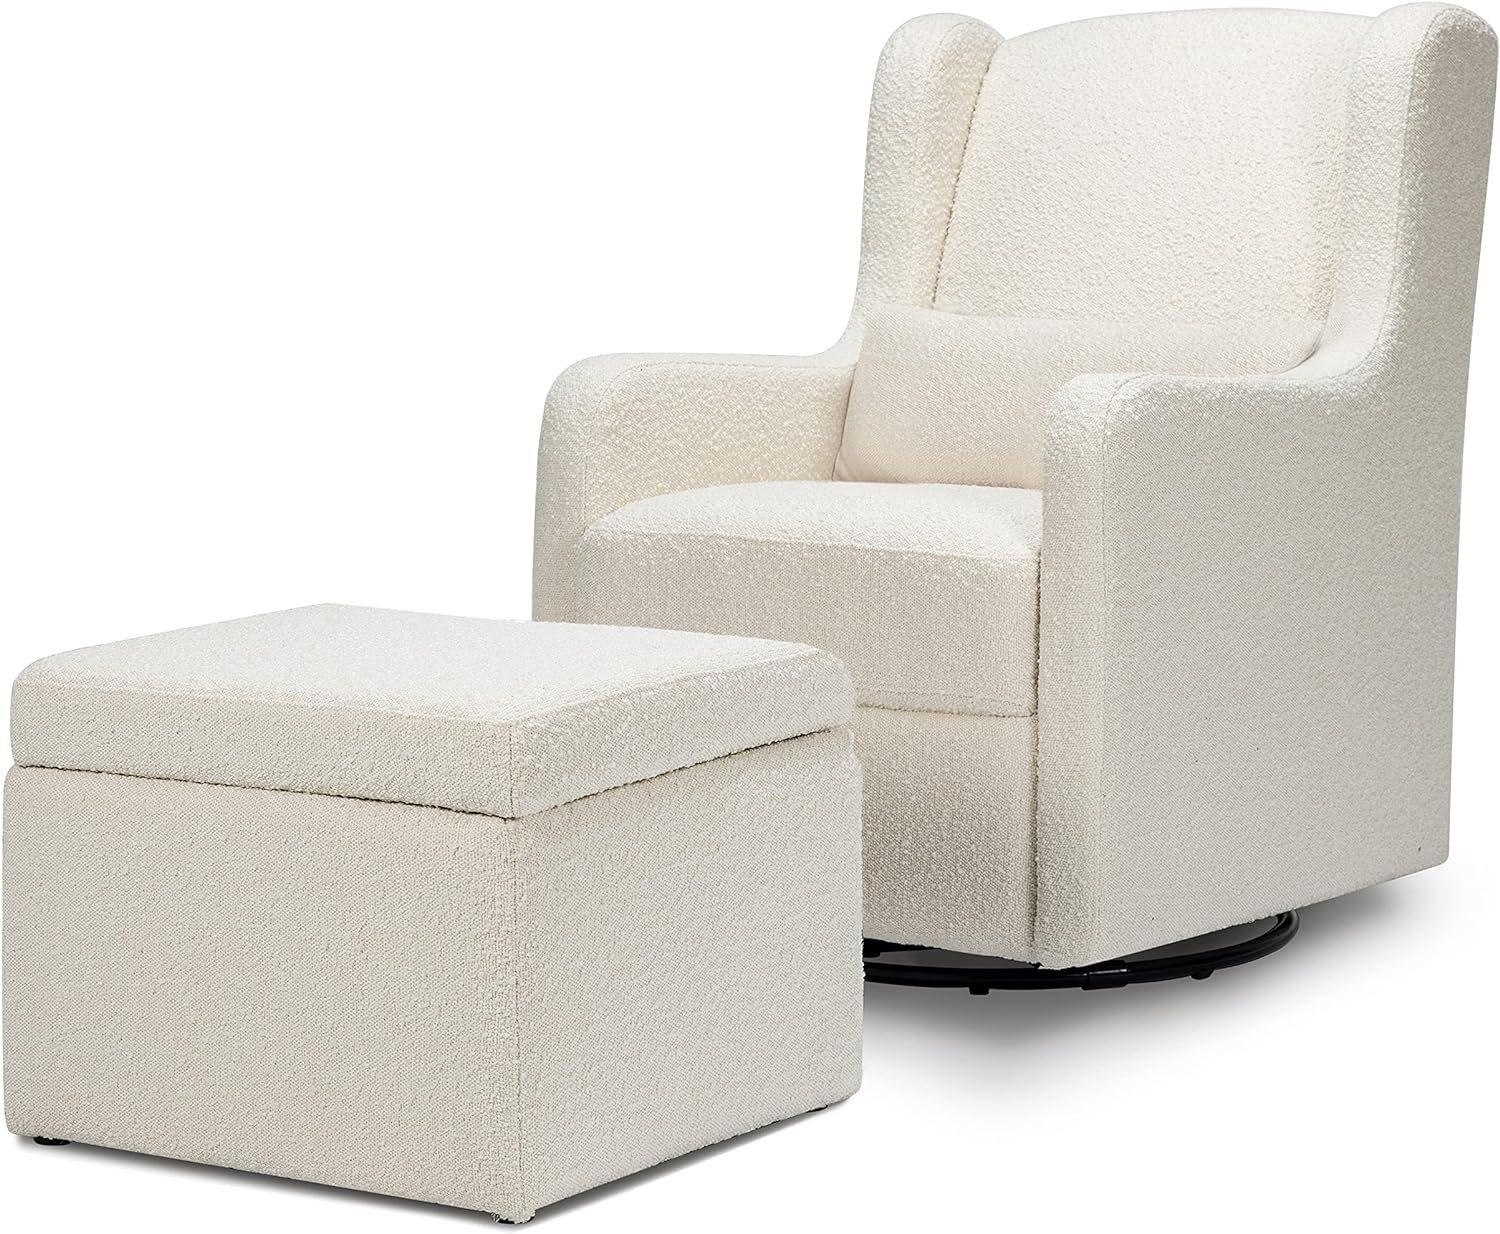 Carter's by DaVinci Adrian Swivel Glider with Storage Ottoman in Ivory Boucle, Greenguard Gold & Cer | Amazon (US)